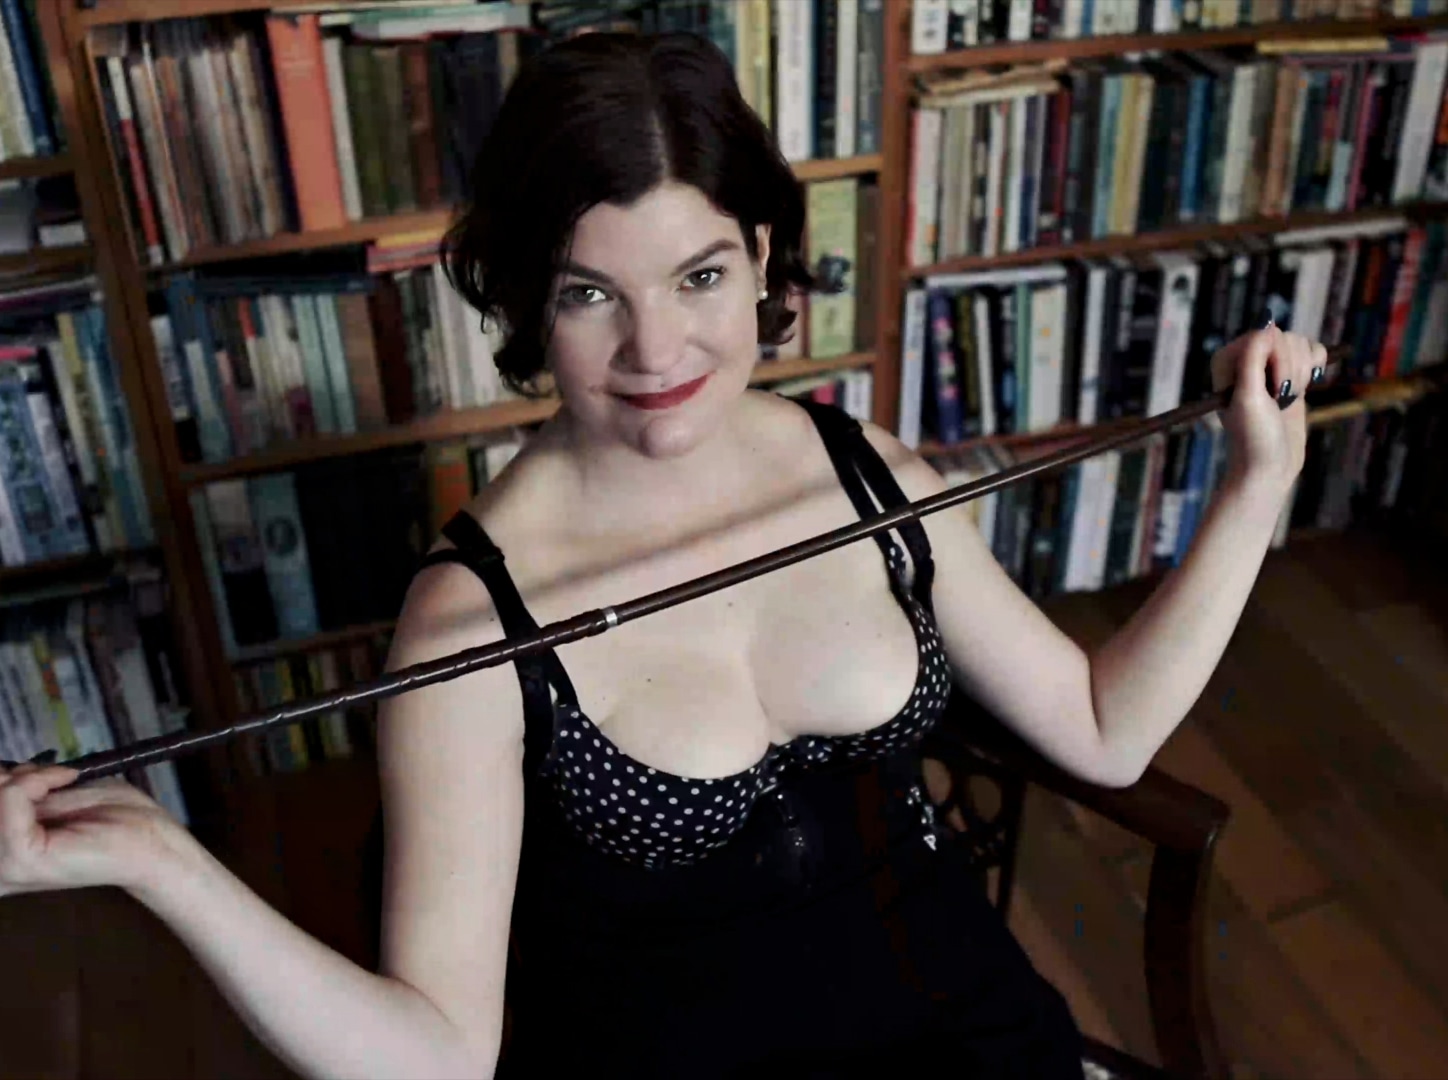 Miss Matthews, wearing a corset, seated in a chair flexing a menacing cane.